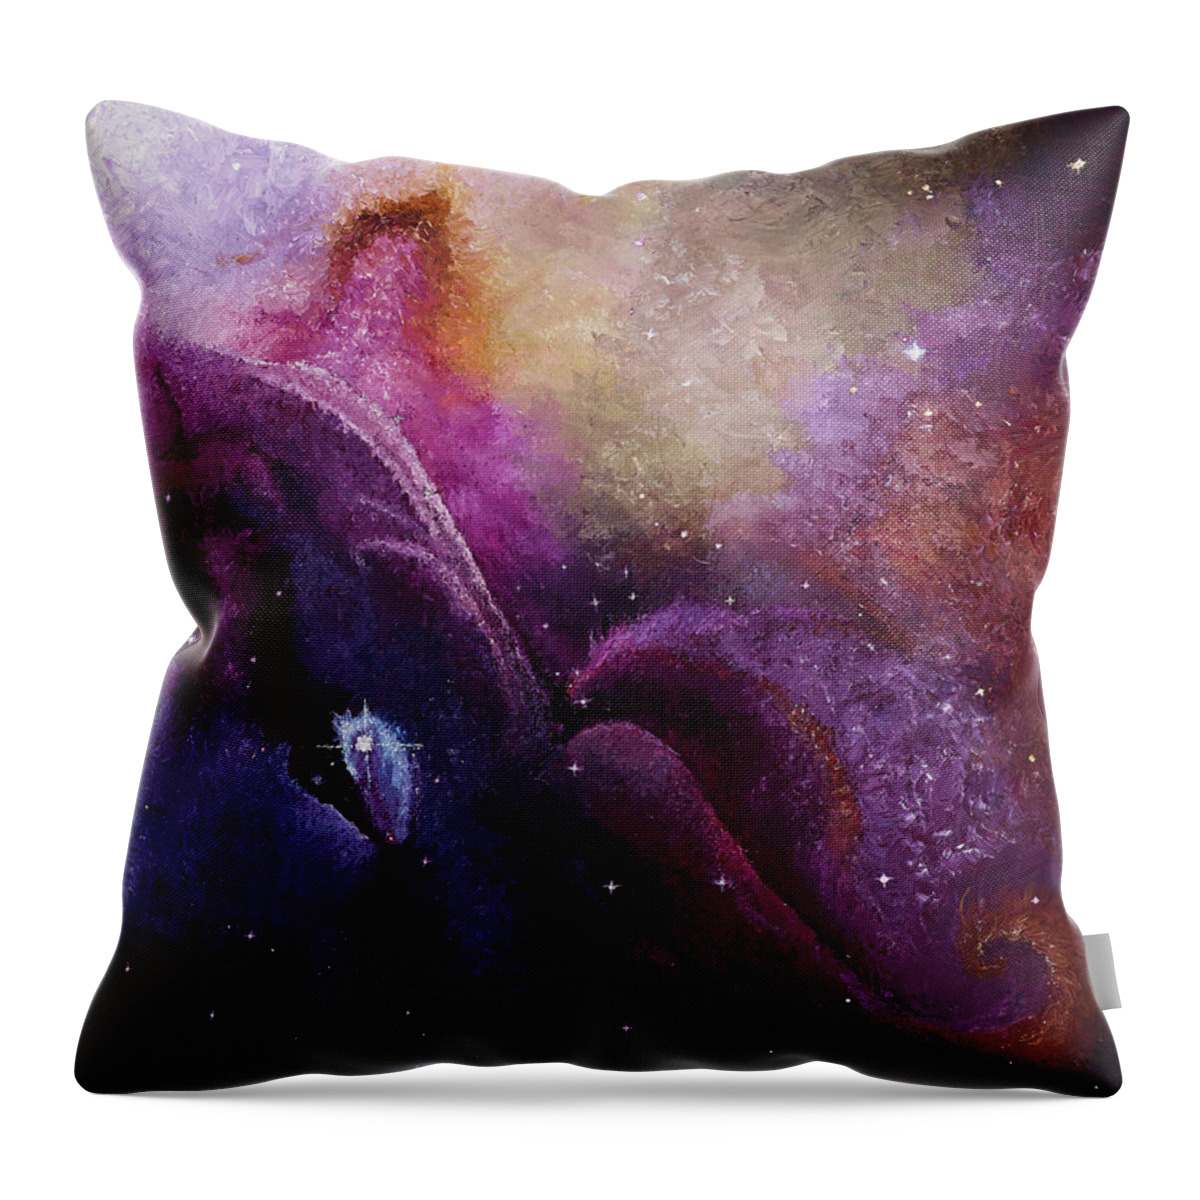 Contemporary Throw Pillow featuring the painting Orion's Nebula by KarenElizabeth Balon